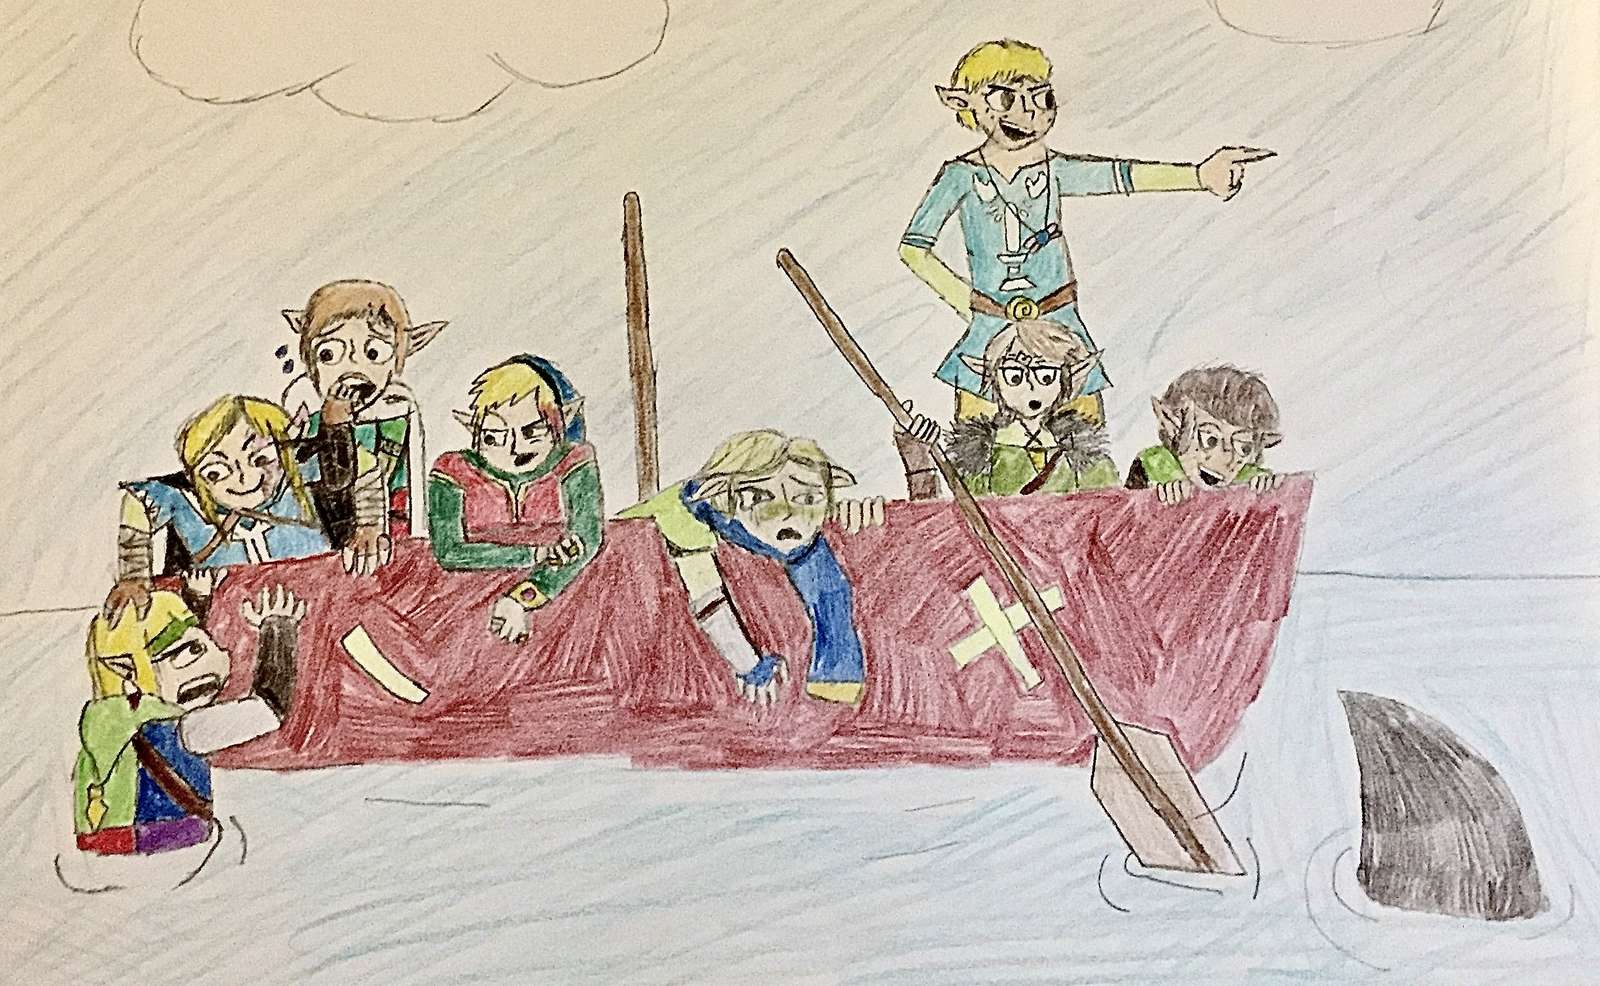 They’re on a boat online puzzle